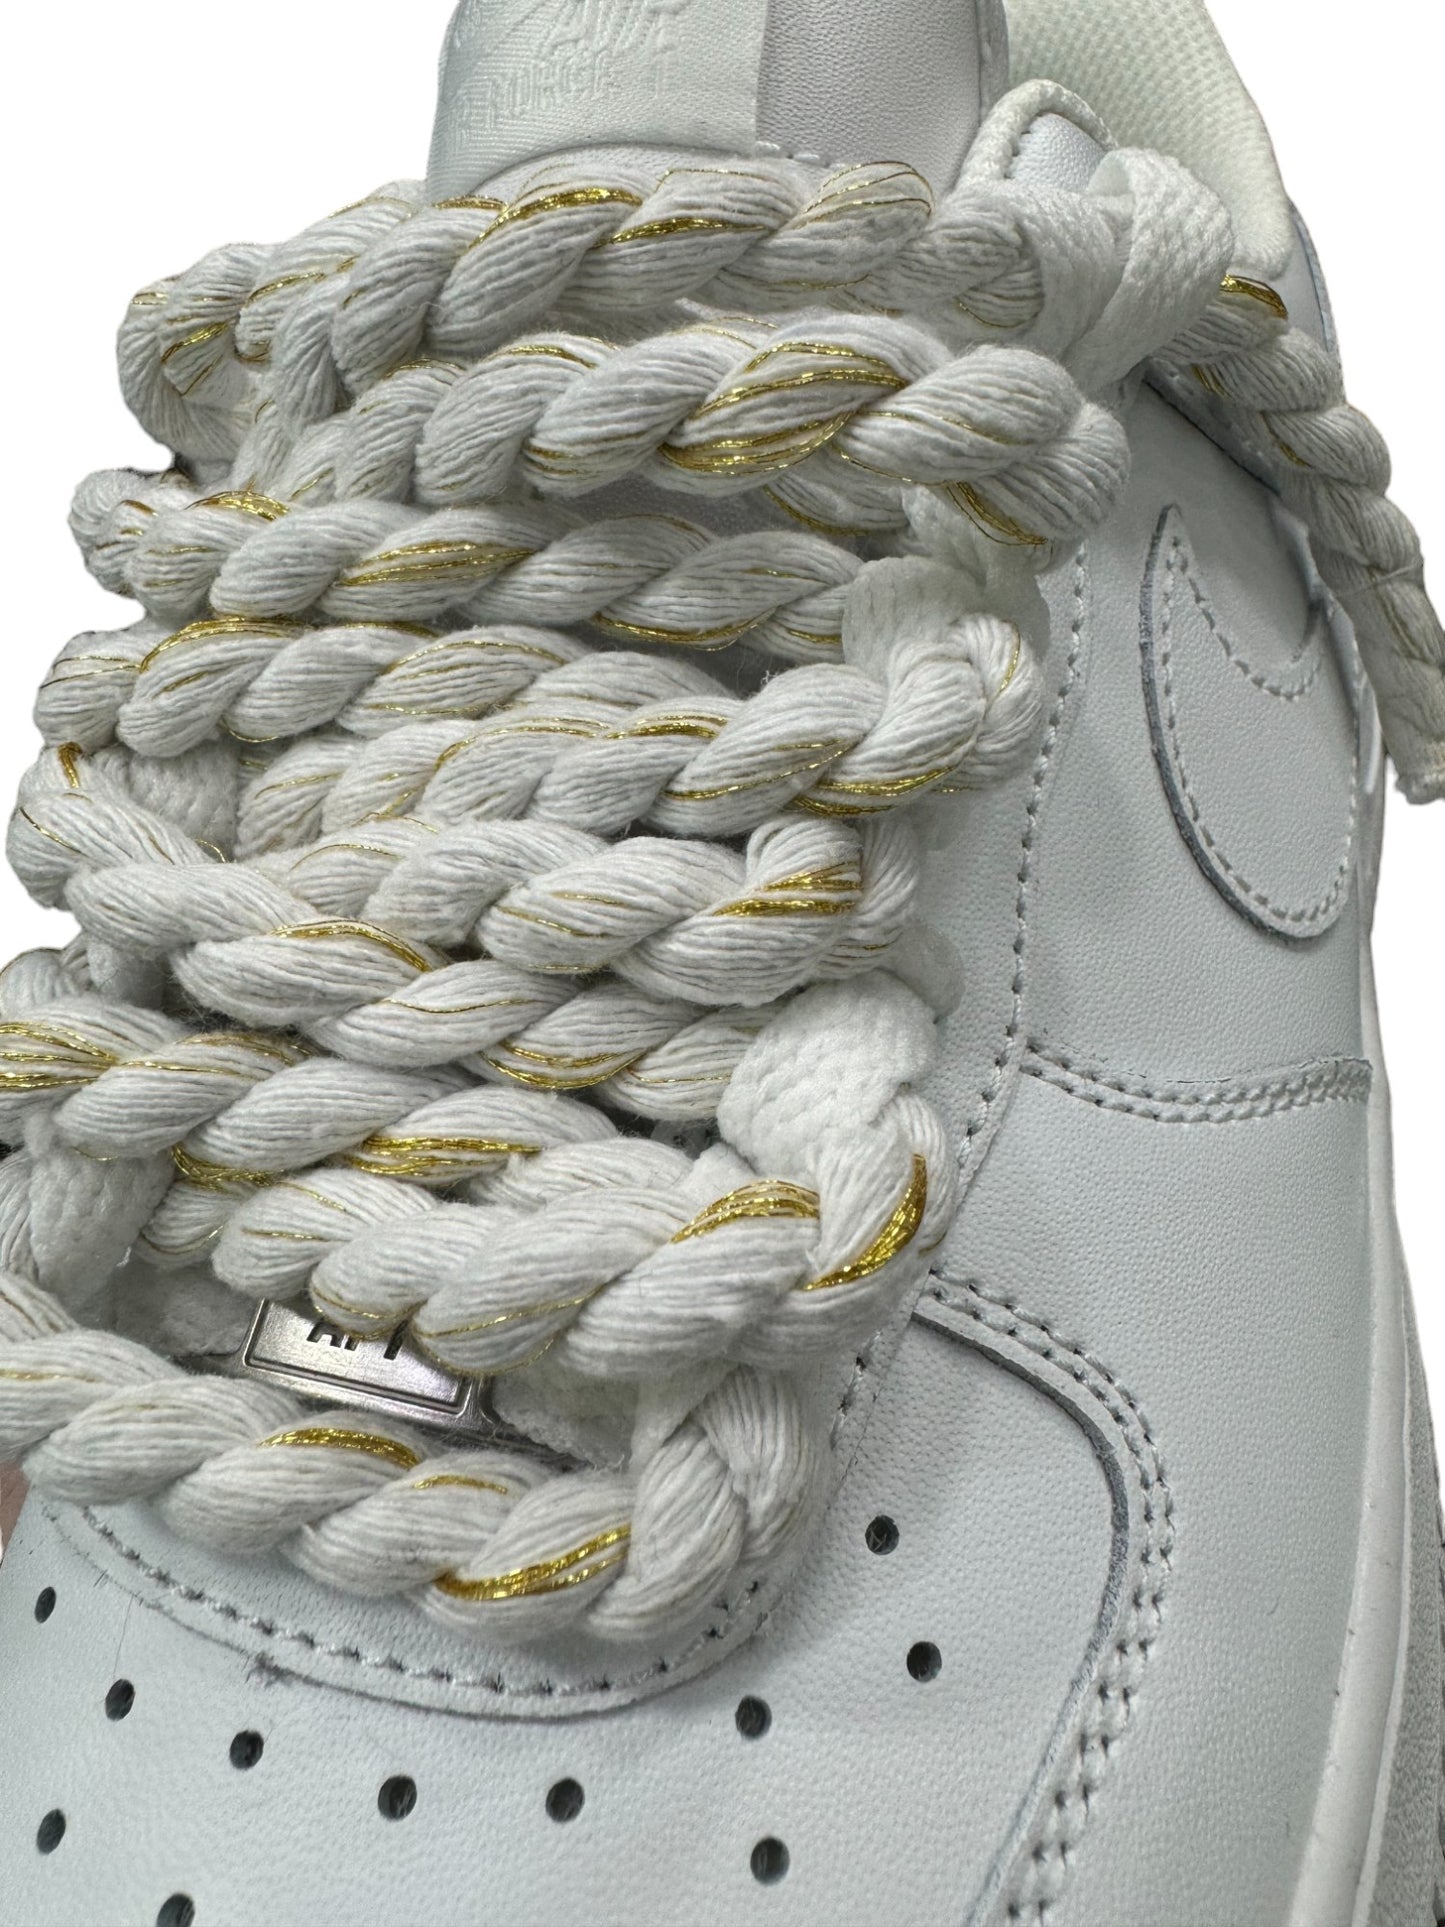 Nike Air Force 1 CUSTOM ROPE LACES white gold